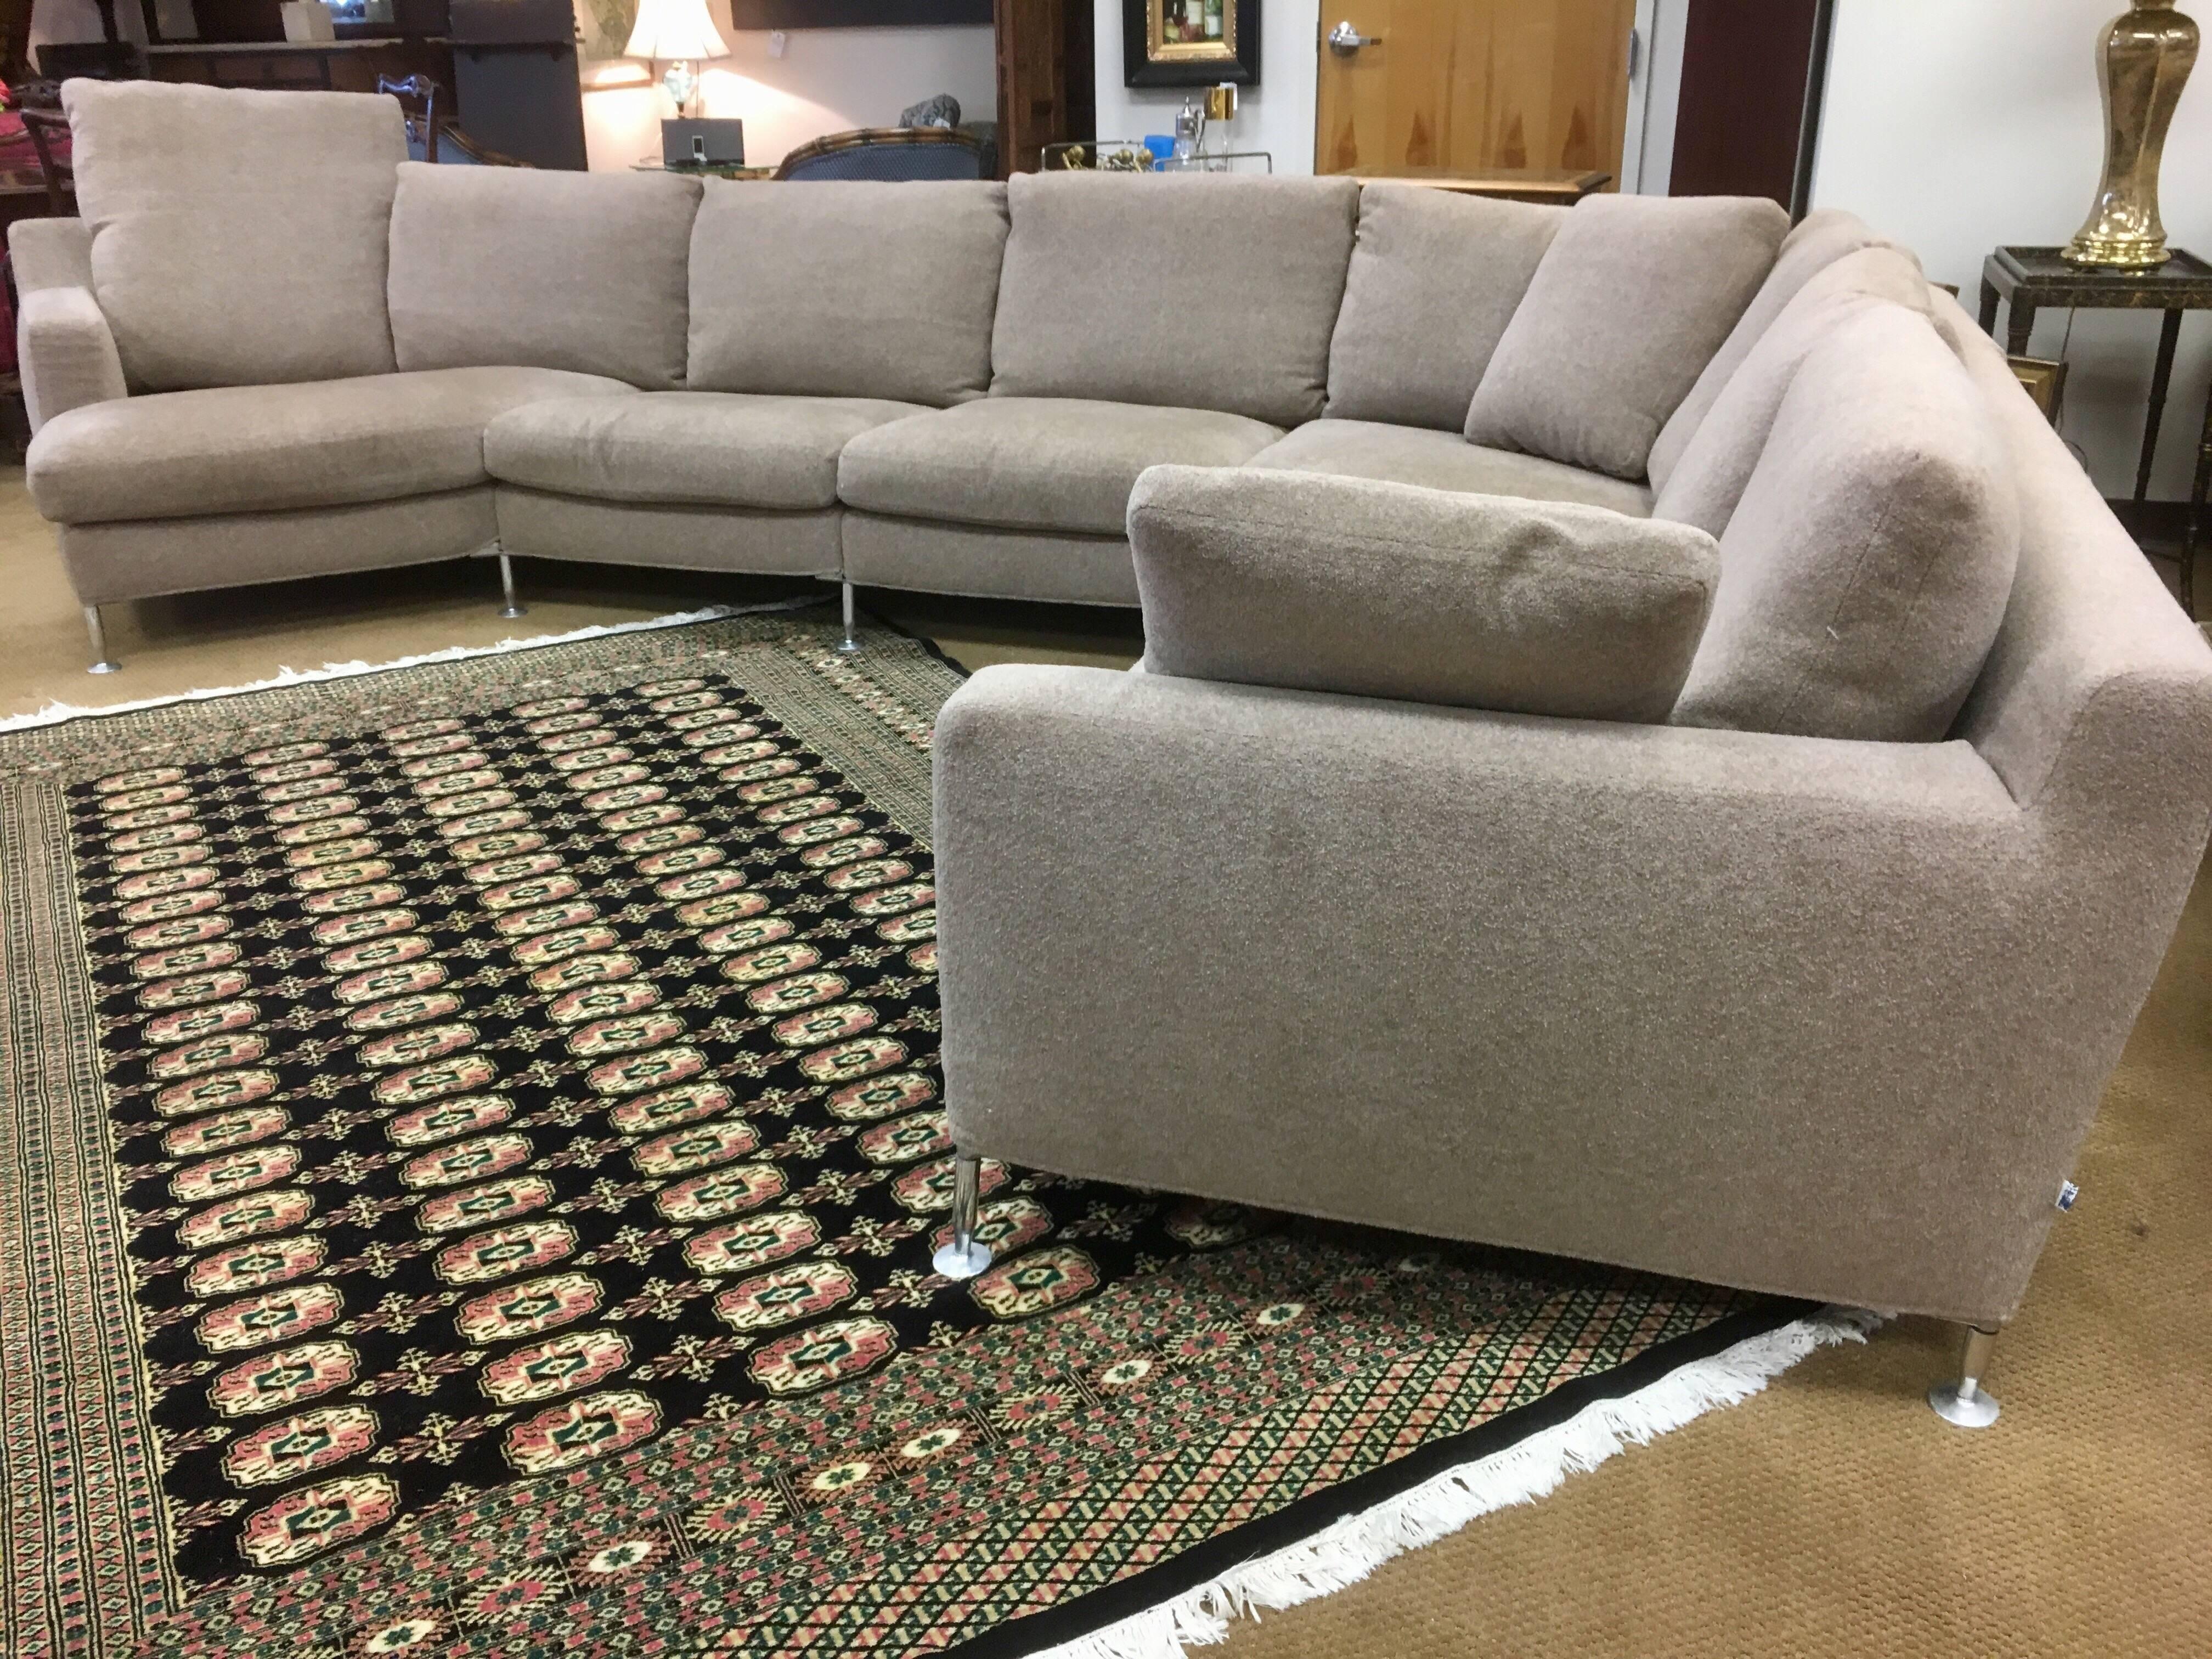 A signed B&B Italia Harry sectional sofa designed by Antonio Citterio. The Harry sectional is Citterio's masterwork at B&B Italia given its one of a kind curved lines on the exterior and it popularity. This piece has a left hand corner